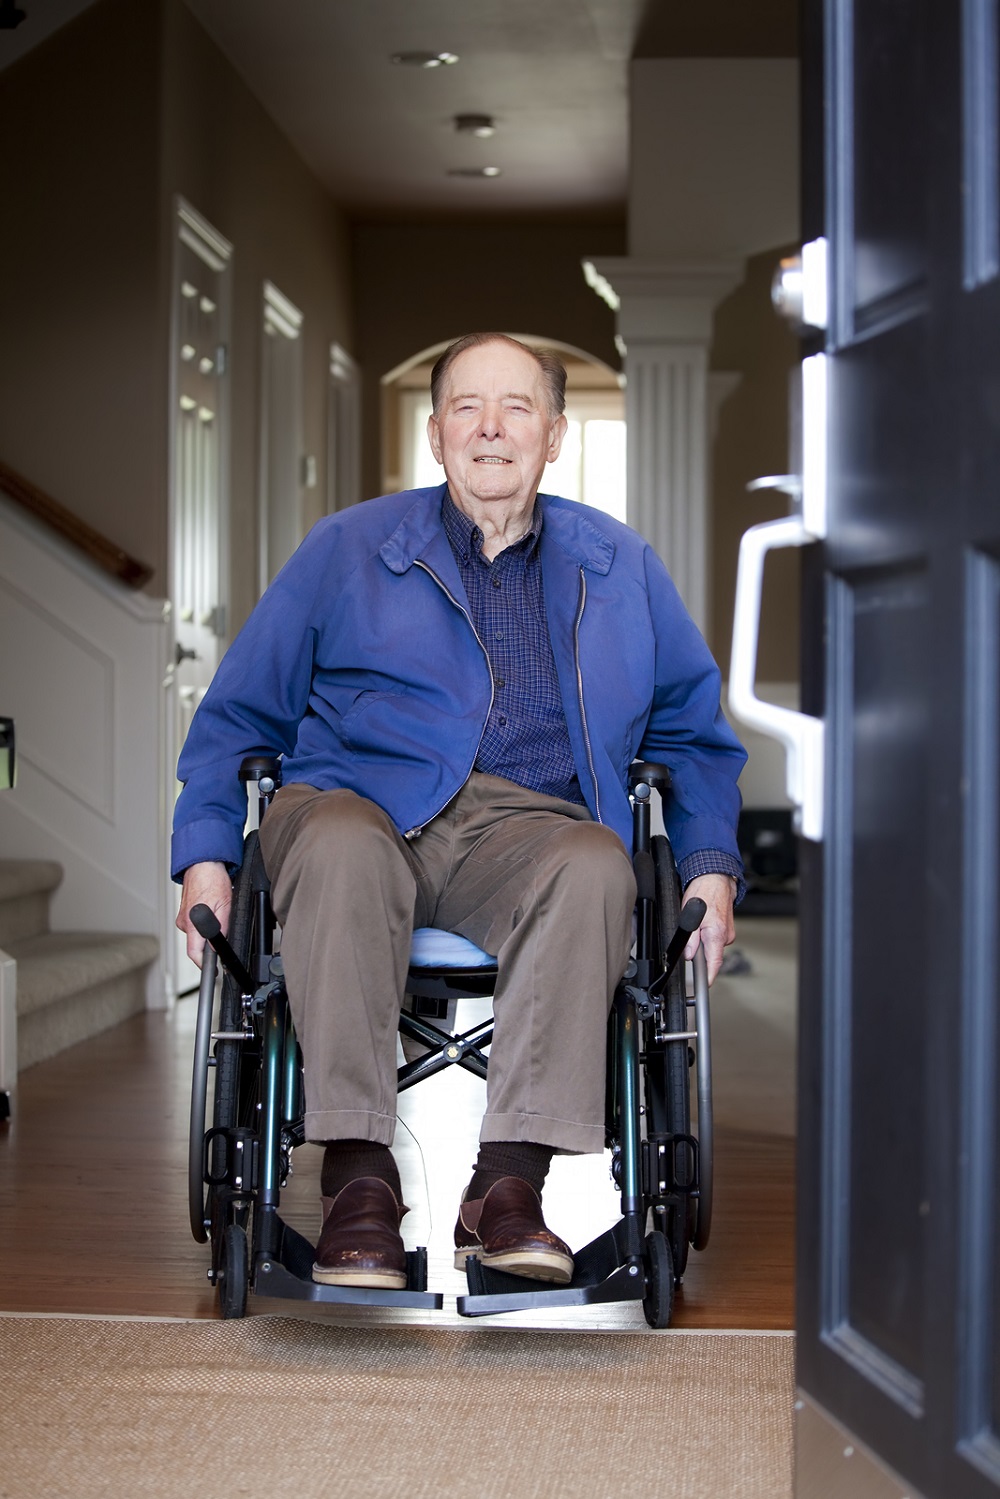 A senior man in a wheelchair headed out the door of his home.